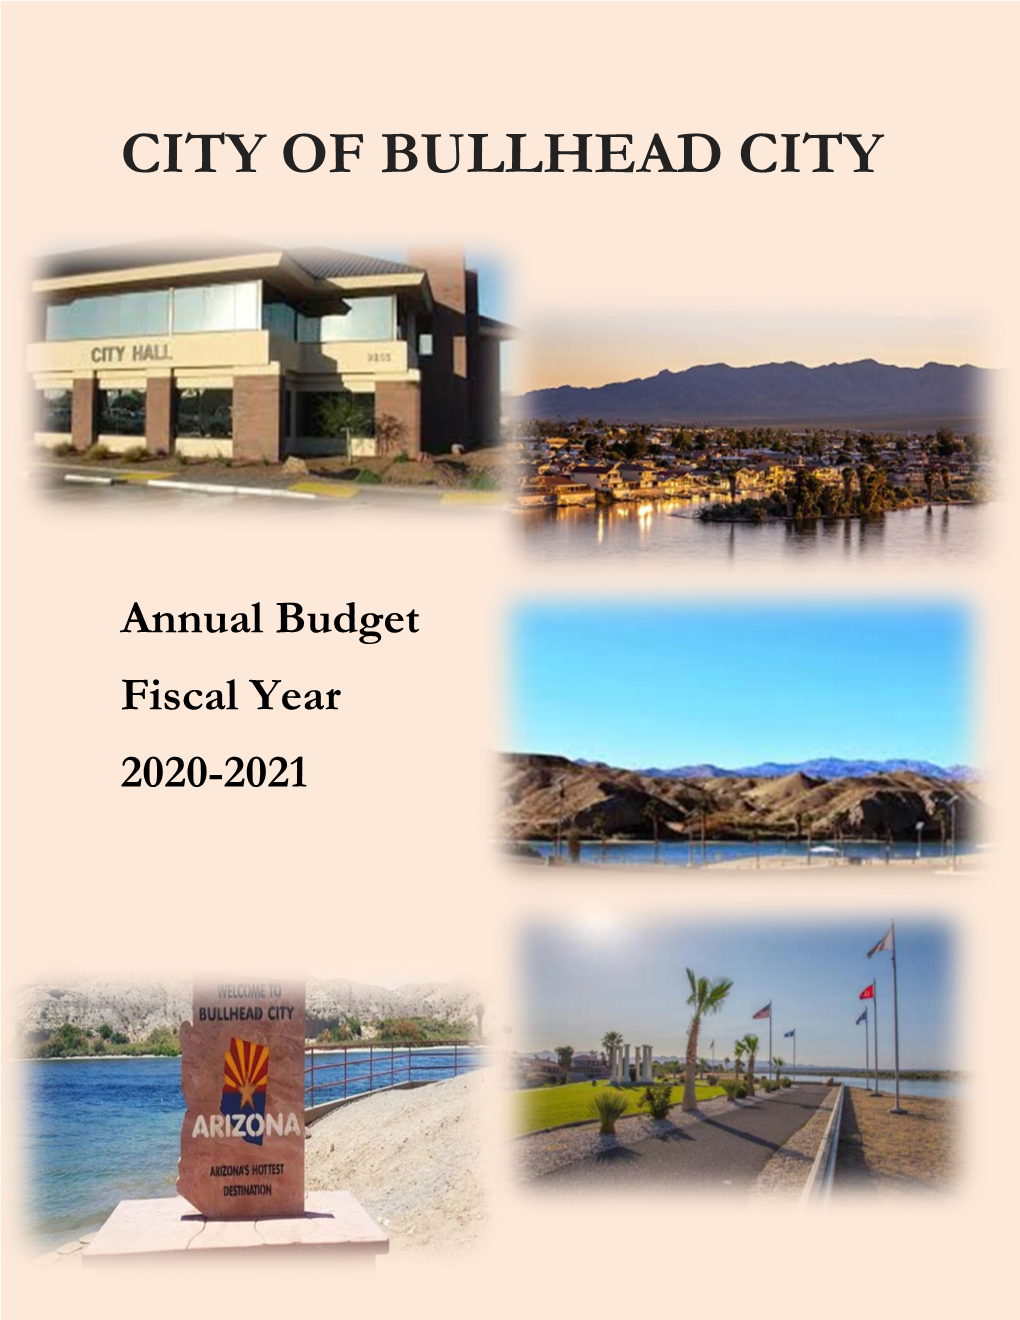 Annual Budget Fiscal Year 2020-2021